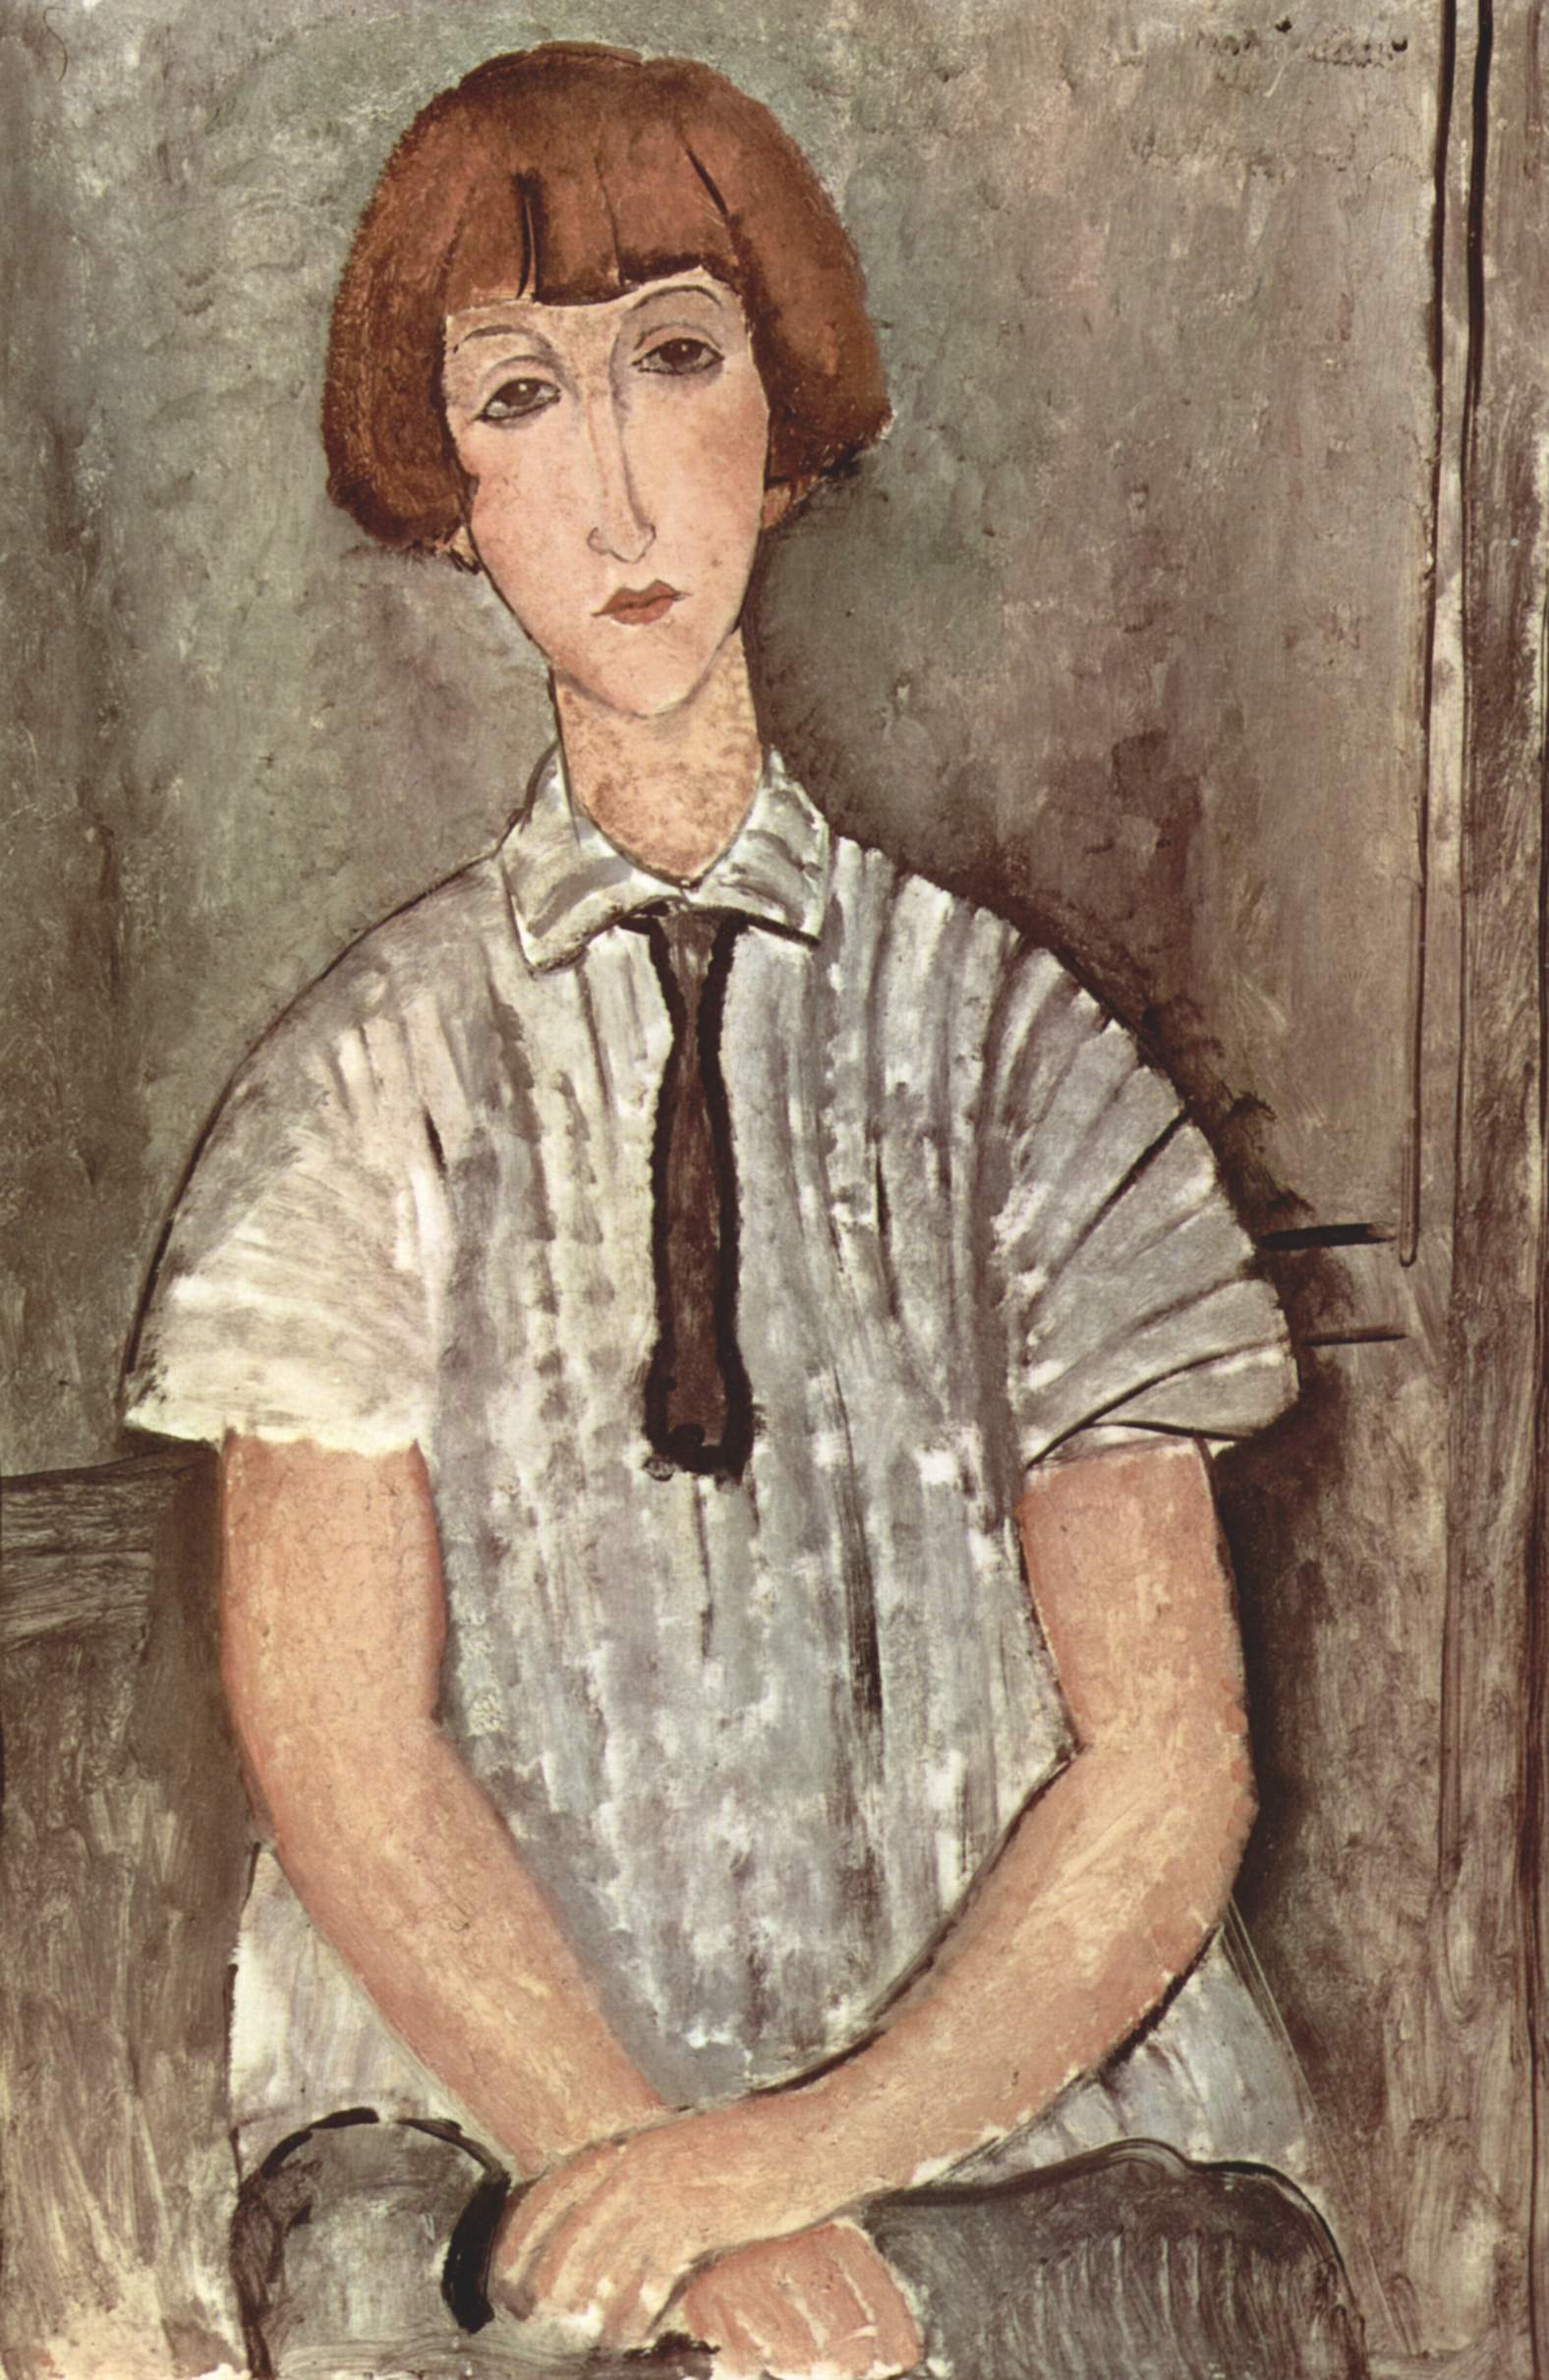 Young Girl in a Striped Shirt (1917).